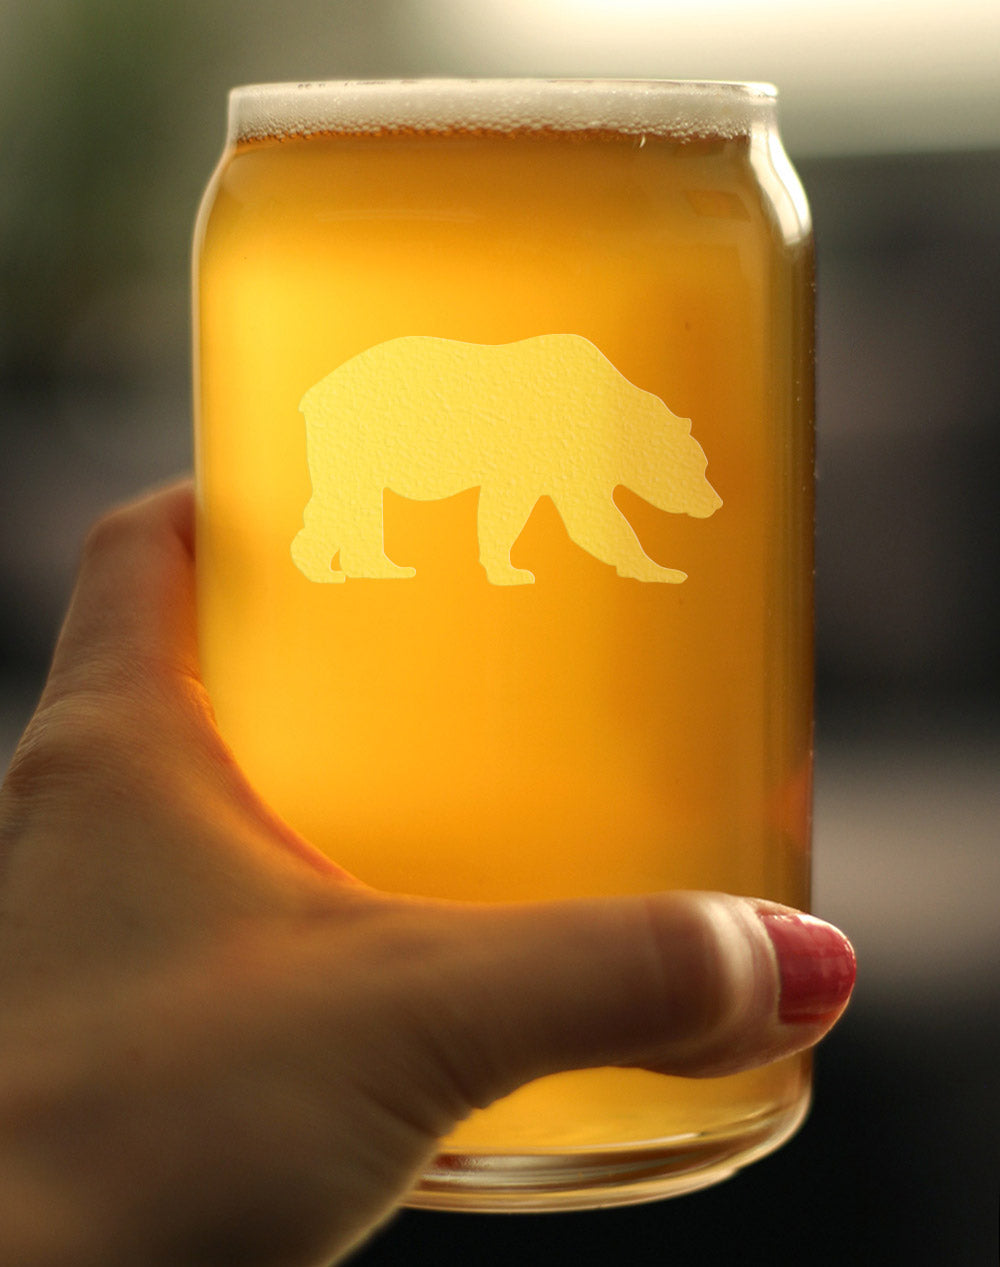 Bear Beer Can Pint Glass - Cabin Themed Gifts or Rustic Decor for Men and Women - Fun Drinking or Party Glasses - 16 oz